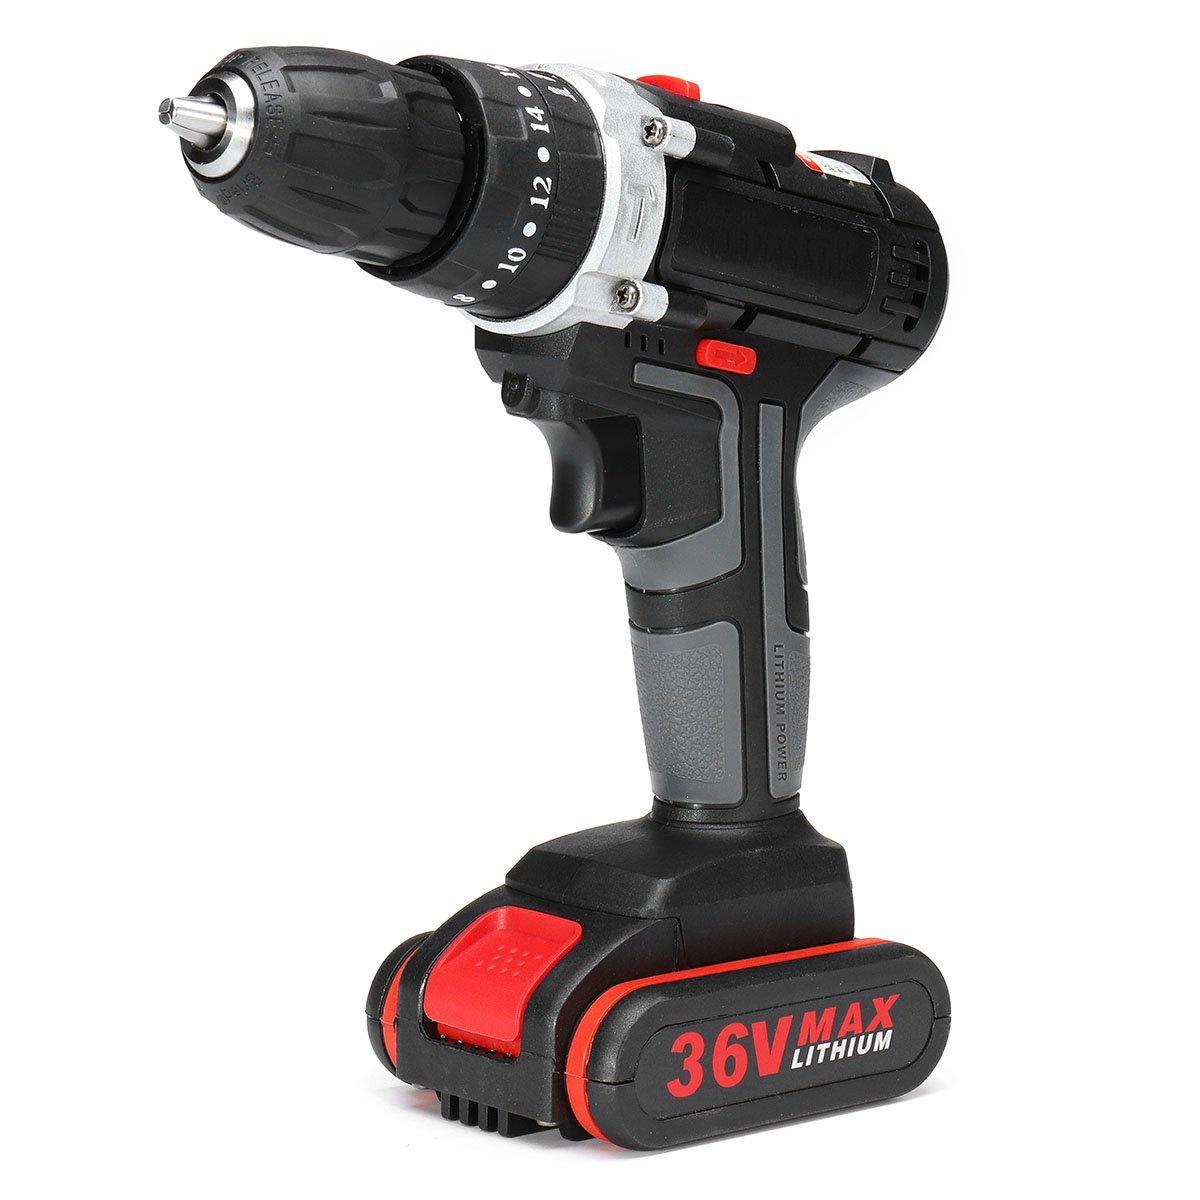 36V 5200mAh Lithium Cordless Electric Screwdriver Power Drill Driver W/ 1 or 2 Battery